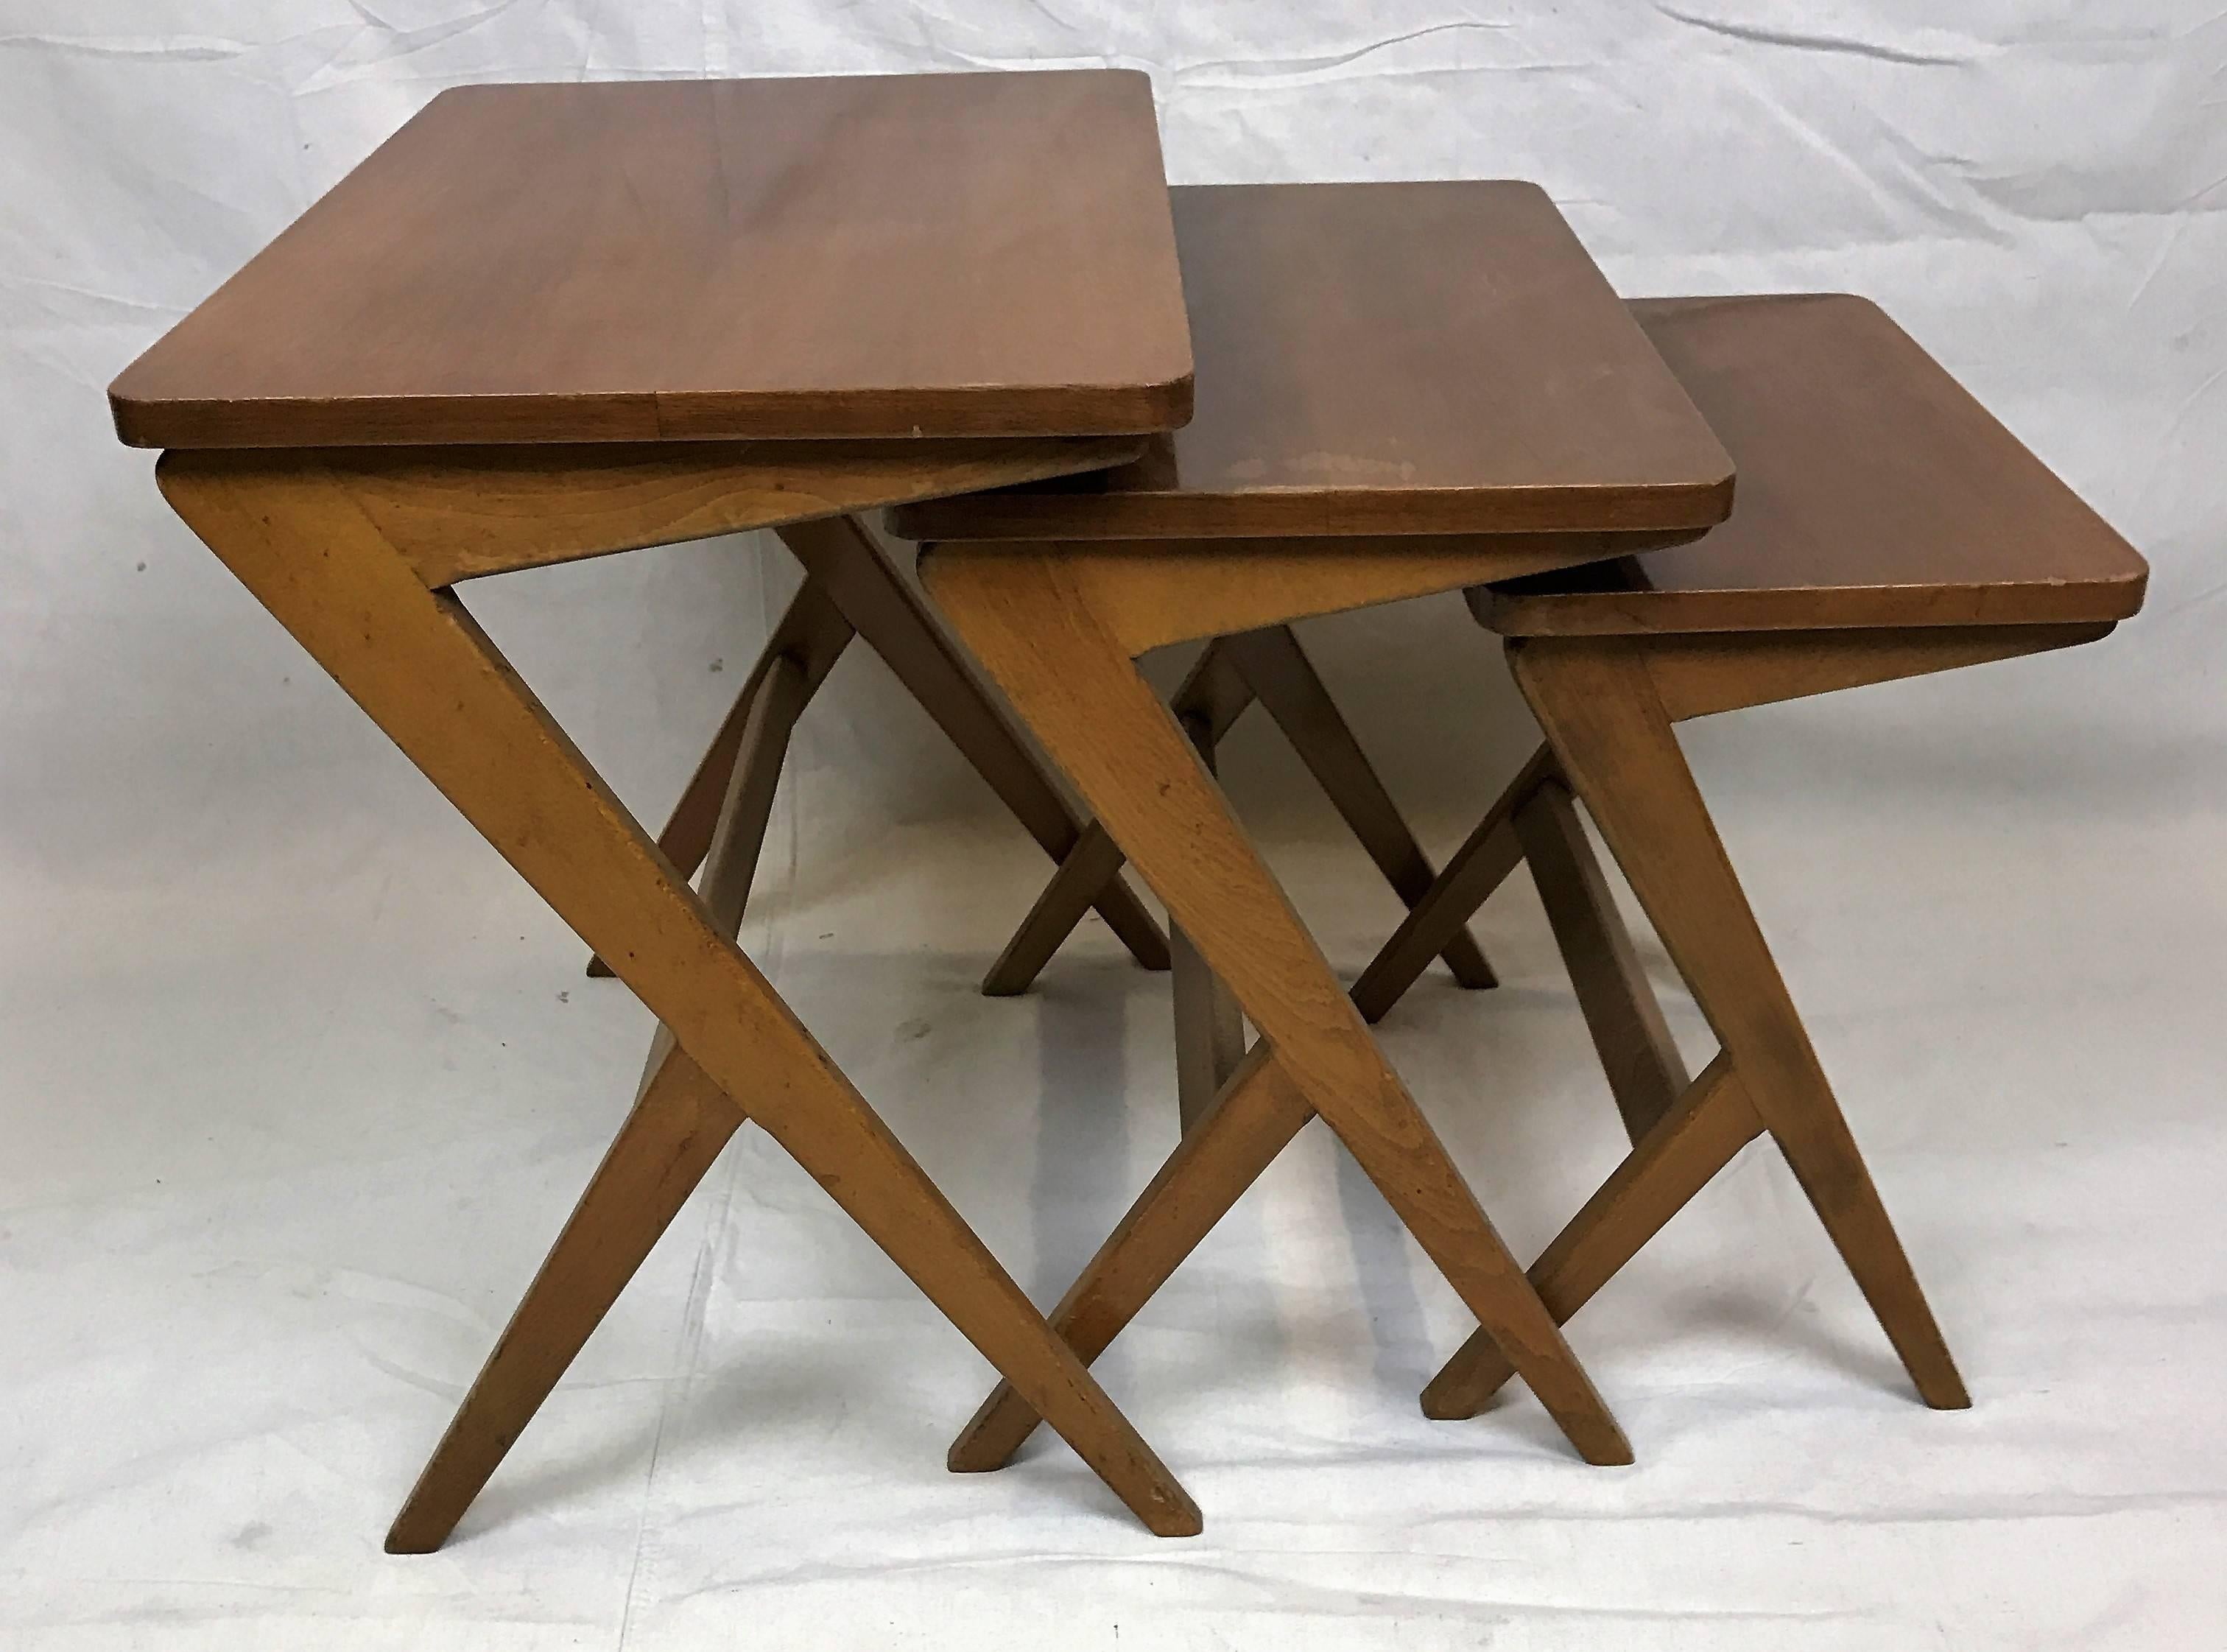 Lovely teak nesting tables attributed to Ico Parisi. Mid table is 18in H x 18.5in W x 12in D and the smallest table is 16in H x 16in W x 10in D.